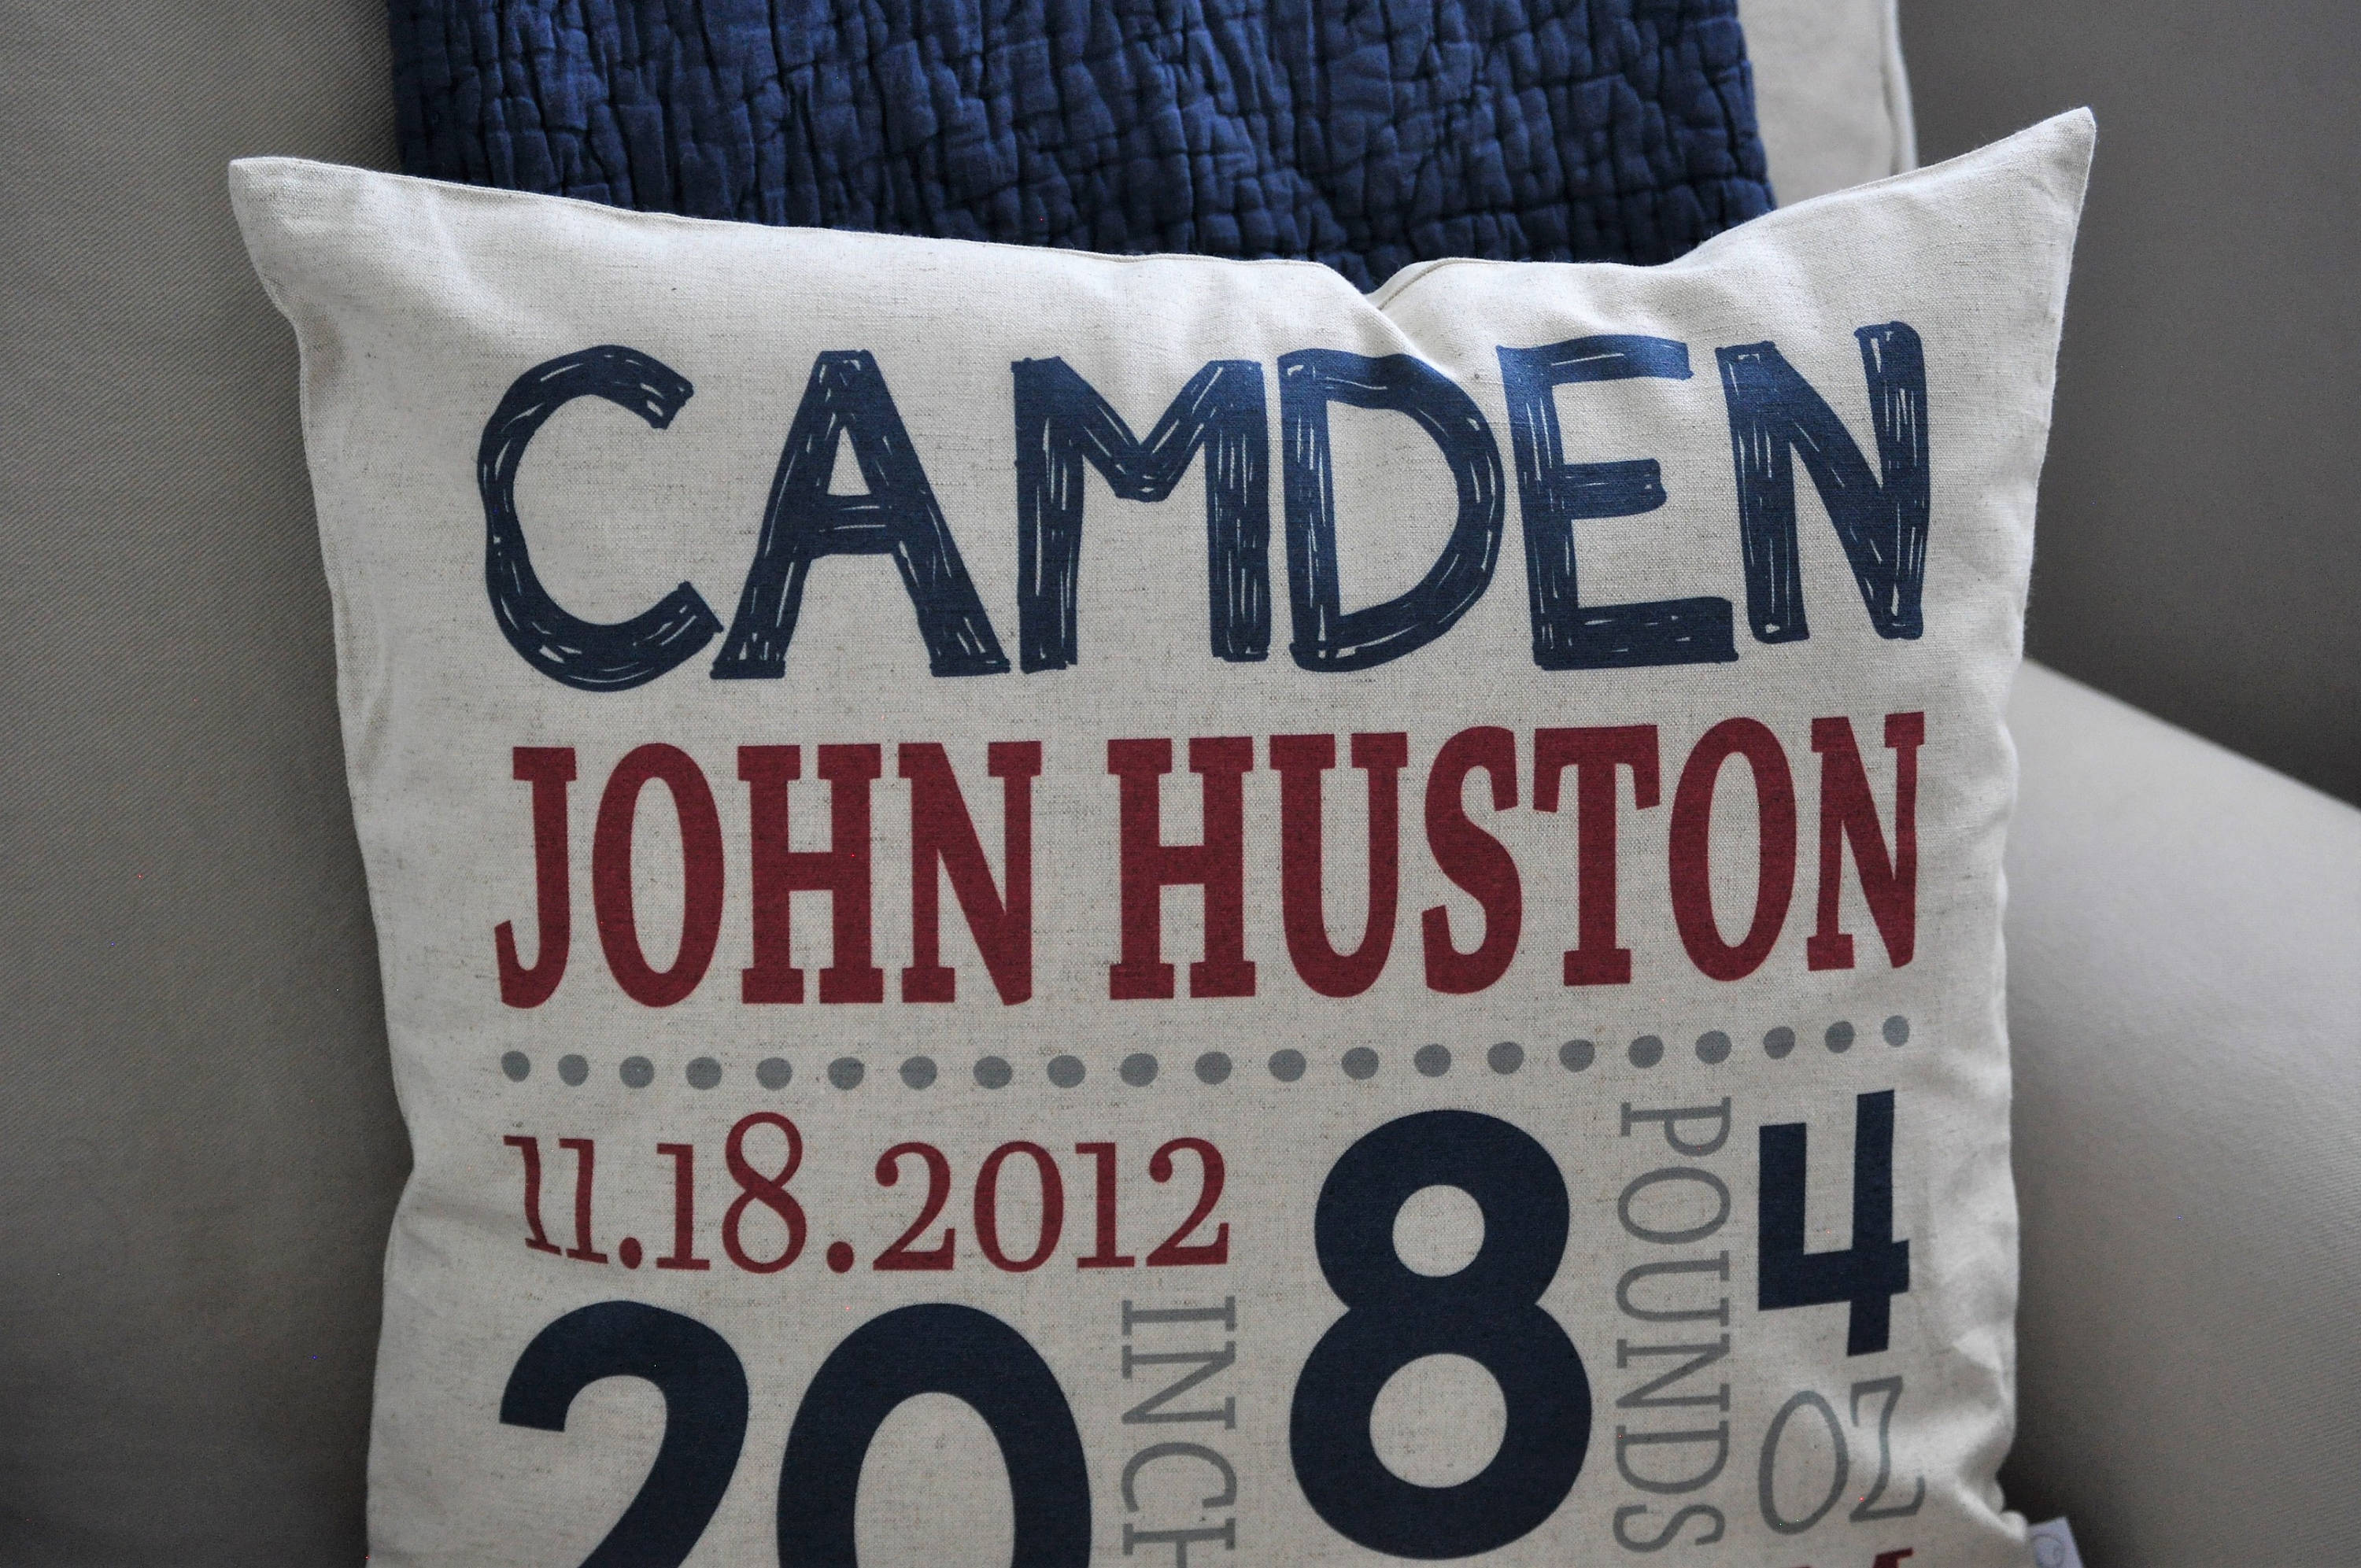 personalized birth pillow